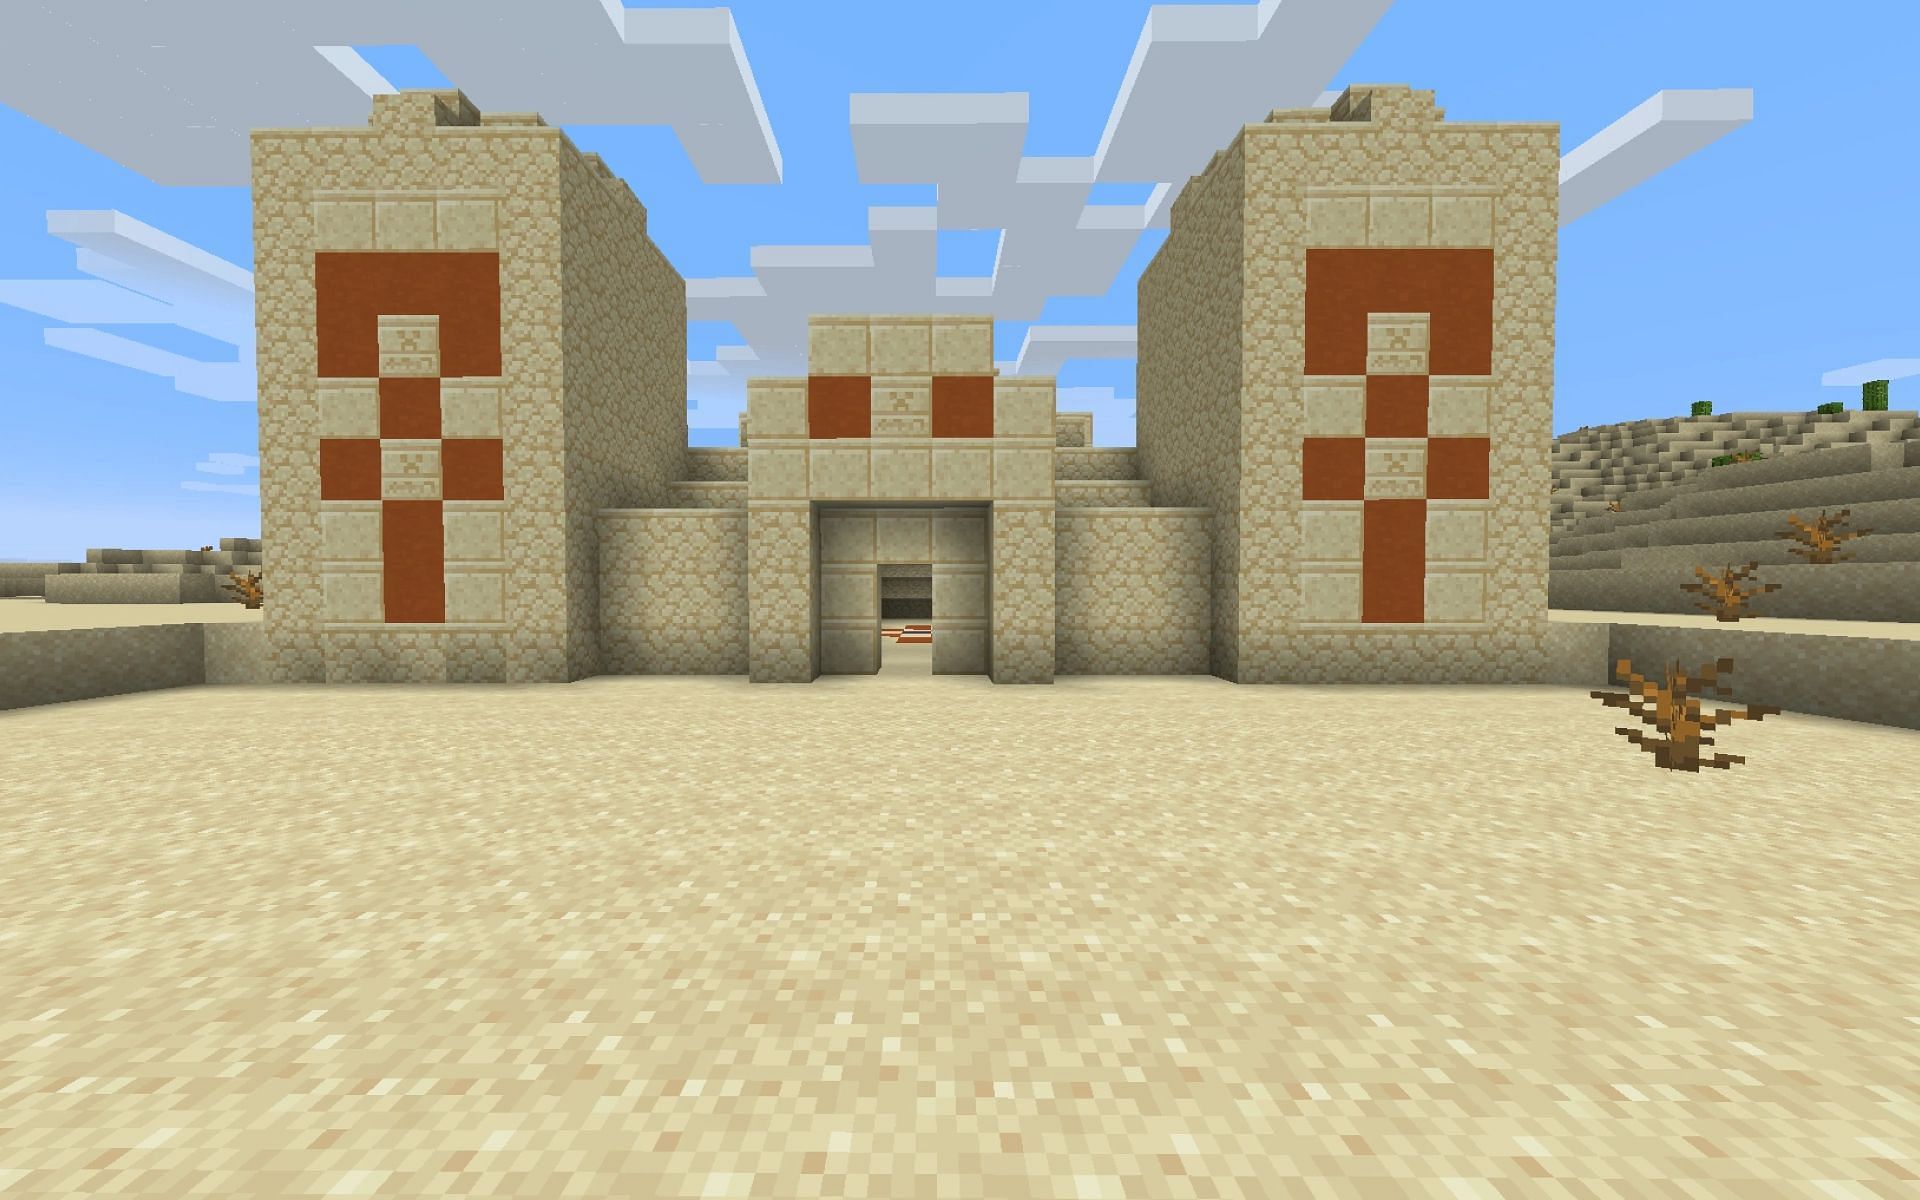 An image of a desert temple in-game (Image via Minecraft)